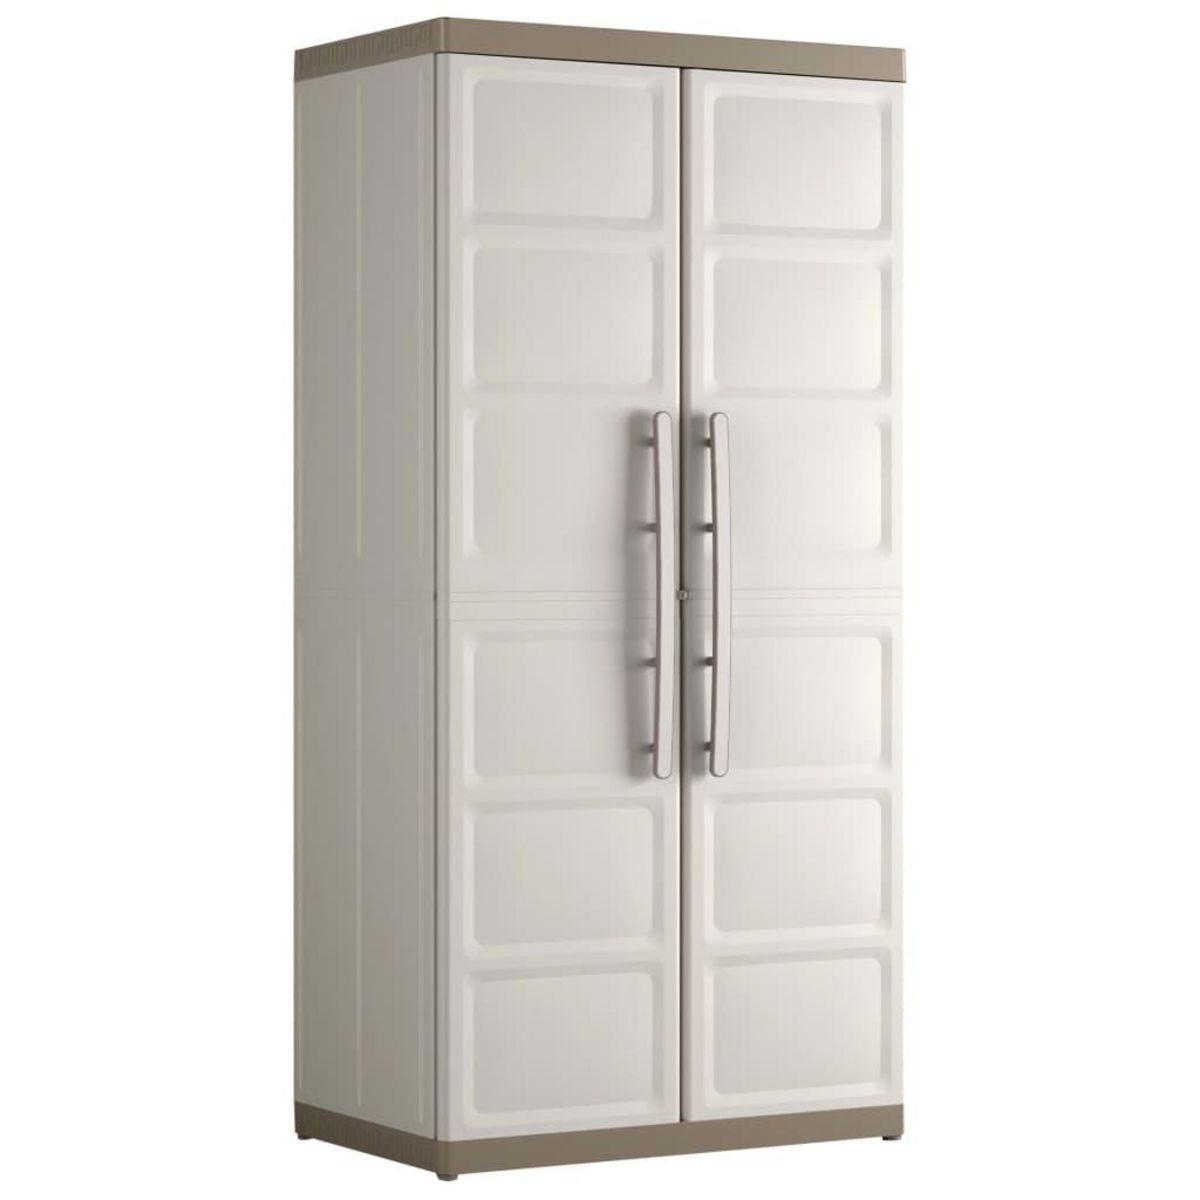 Keter Keter Armoire a etageres Excellence XL Beige et taupe 182 cm